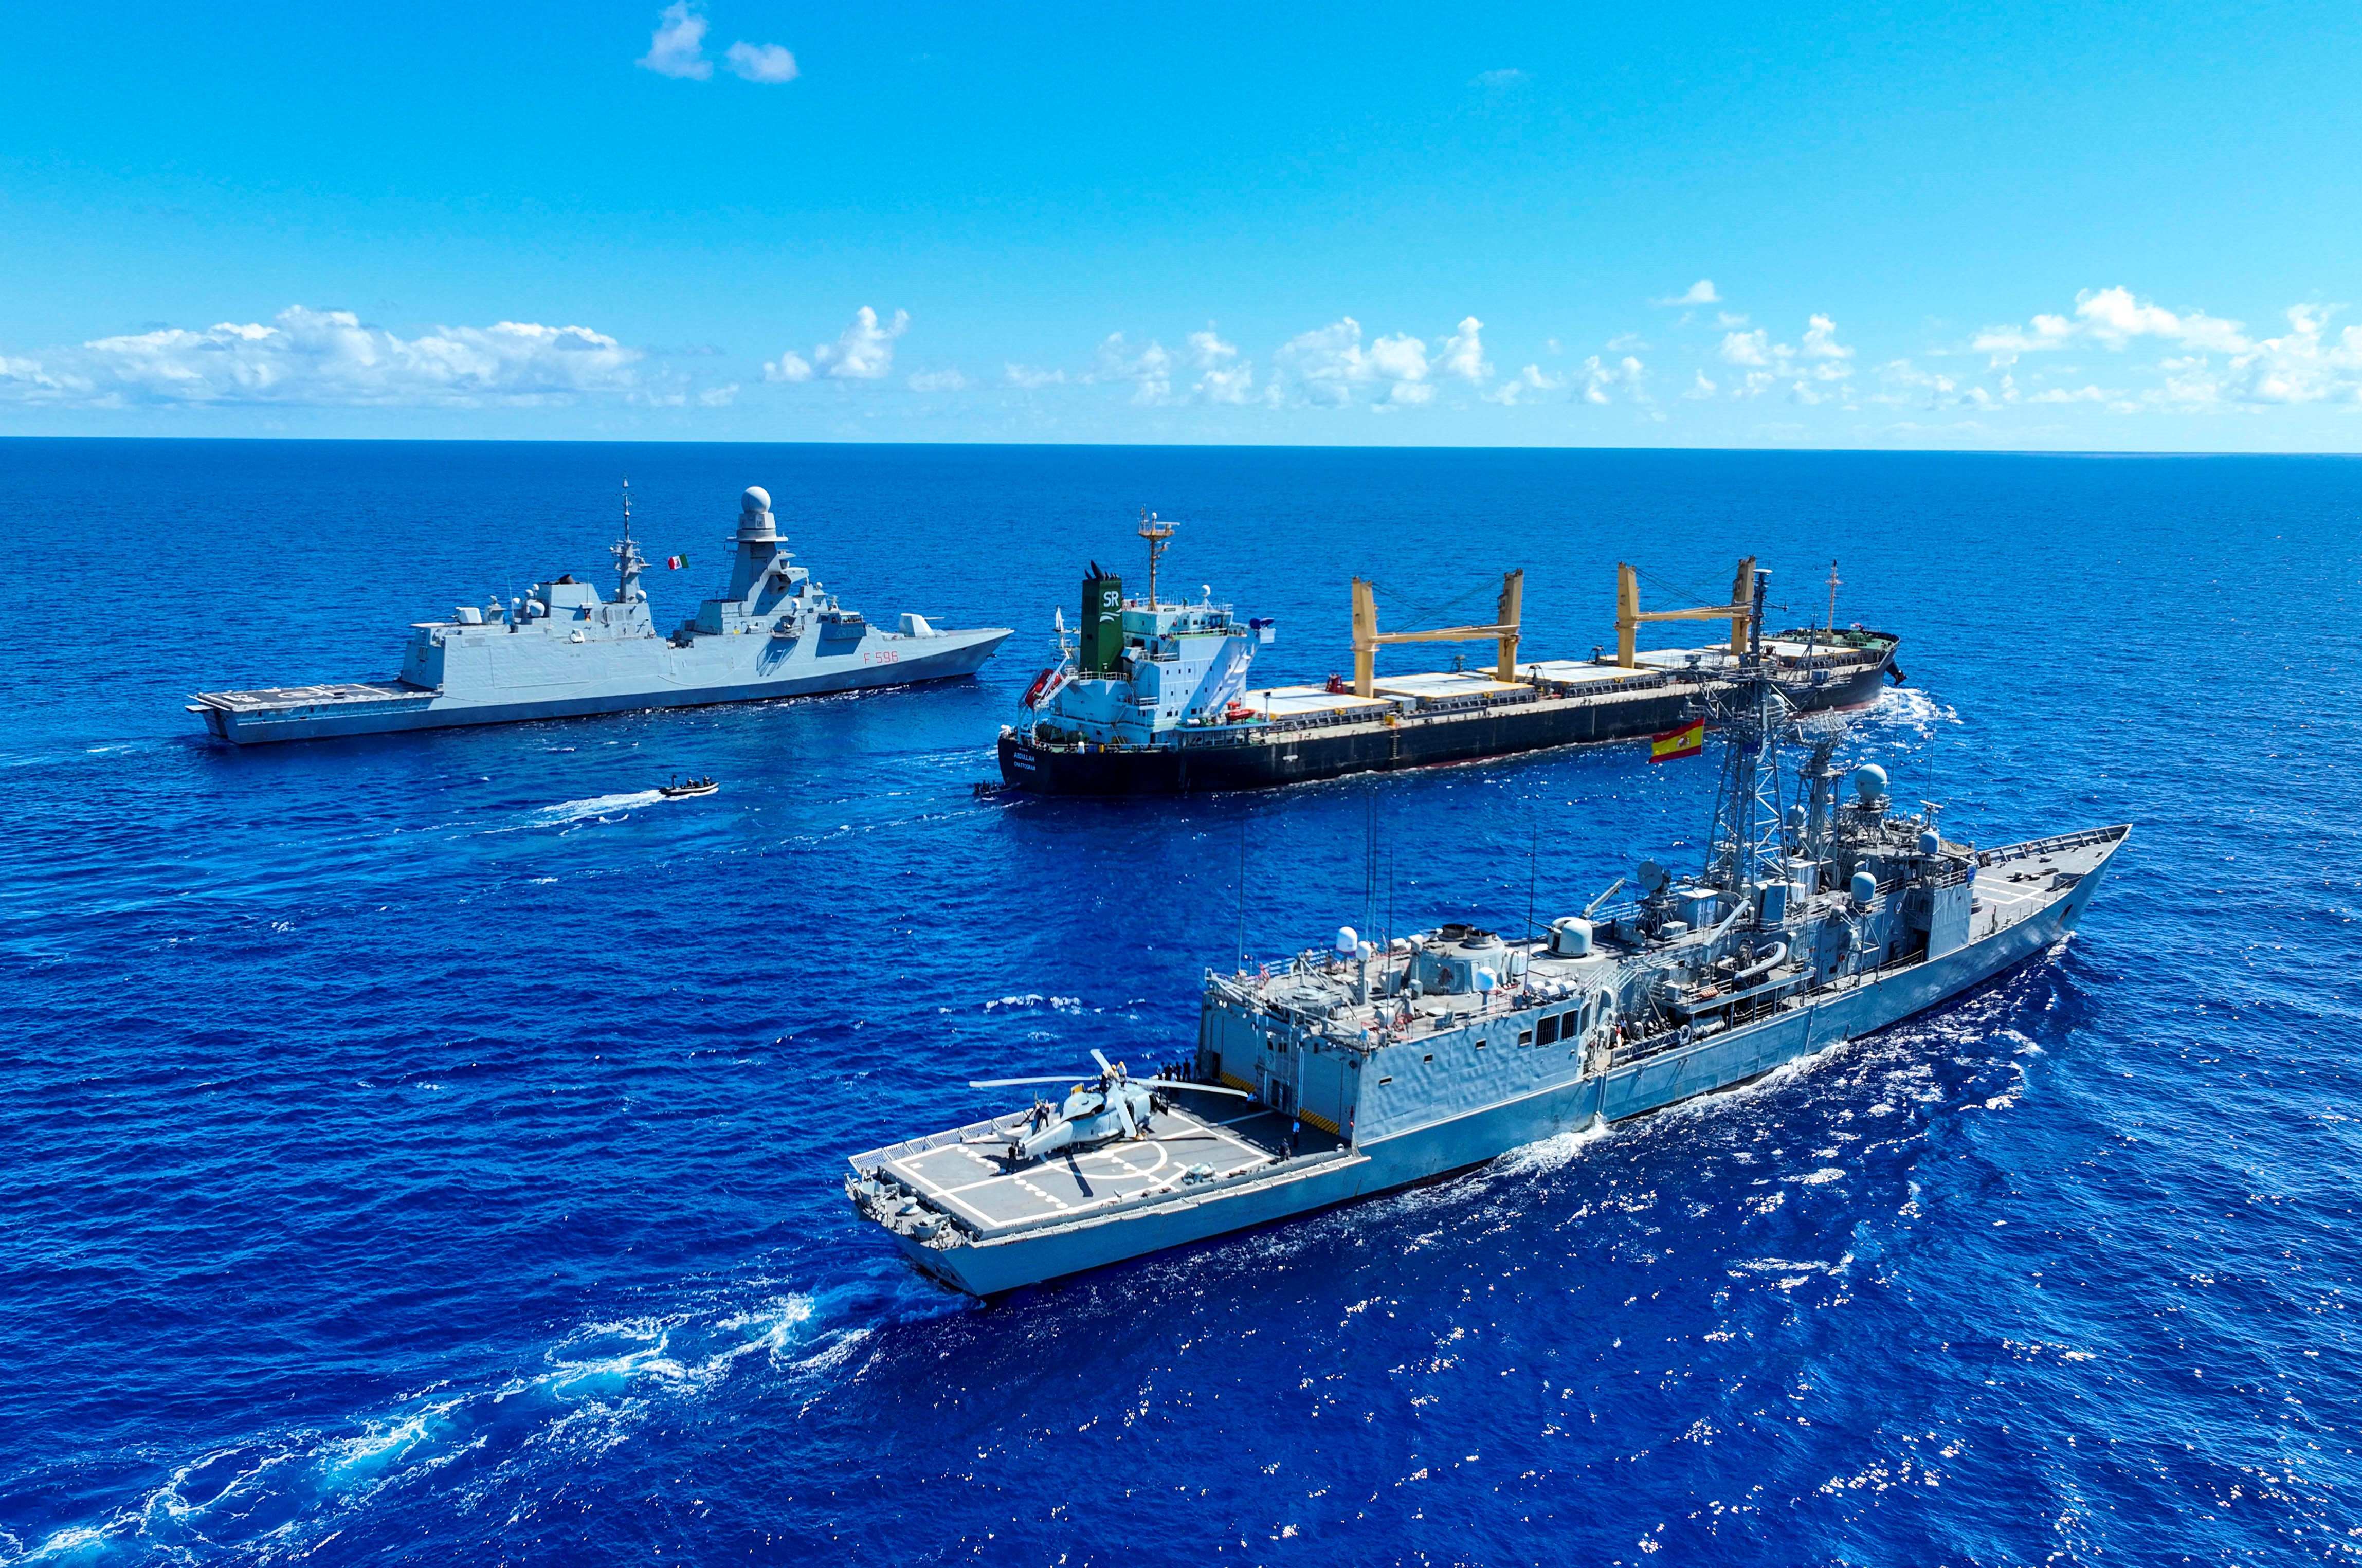 Spanish and Italian frigates escort the MV 'Abdullah' after its release